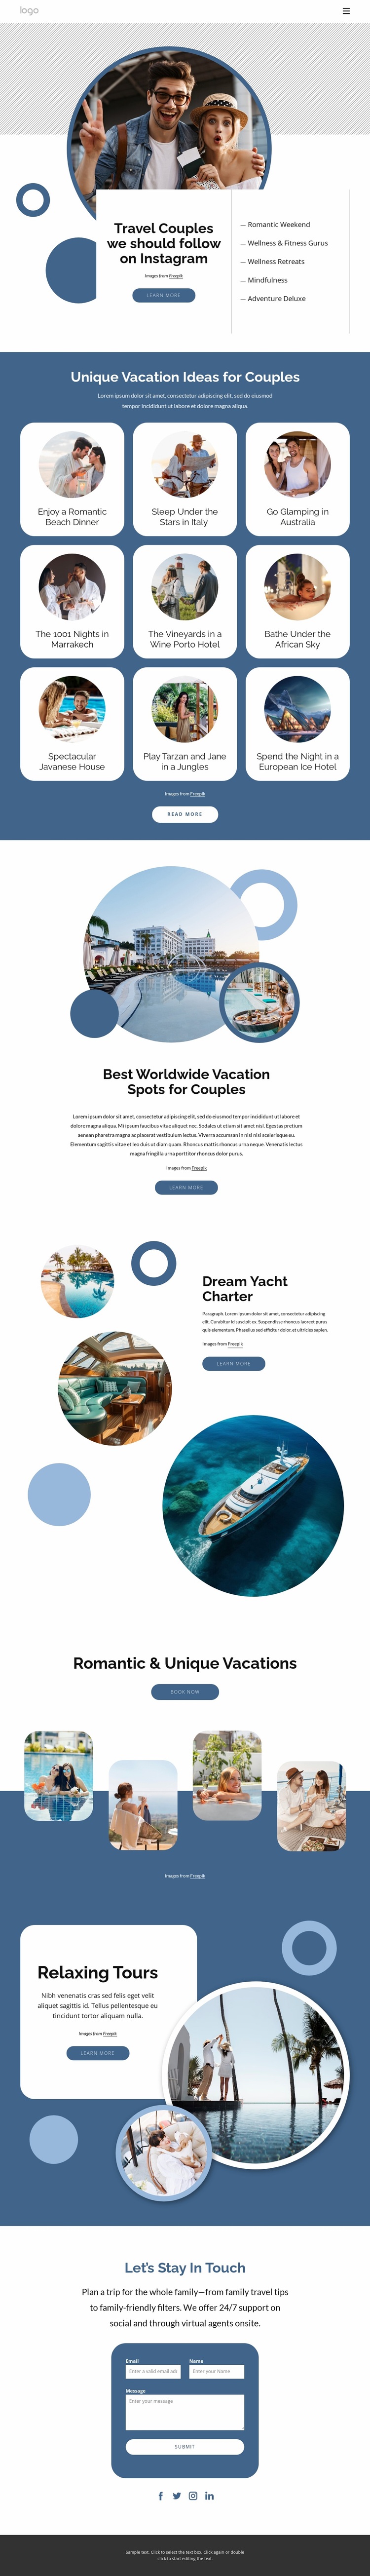 Imagine travelling to some of the most amazing places Website Design